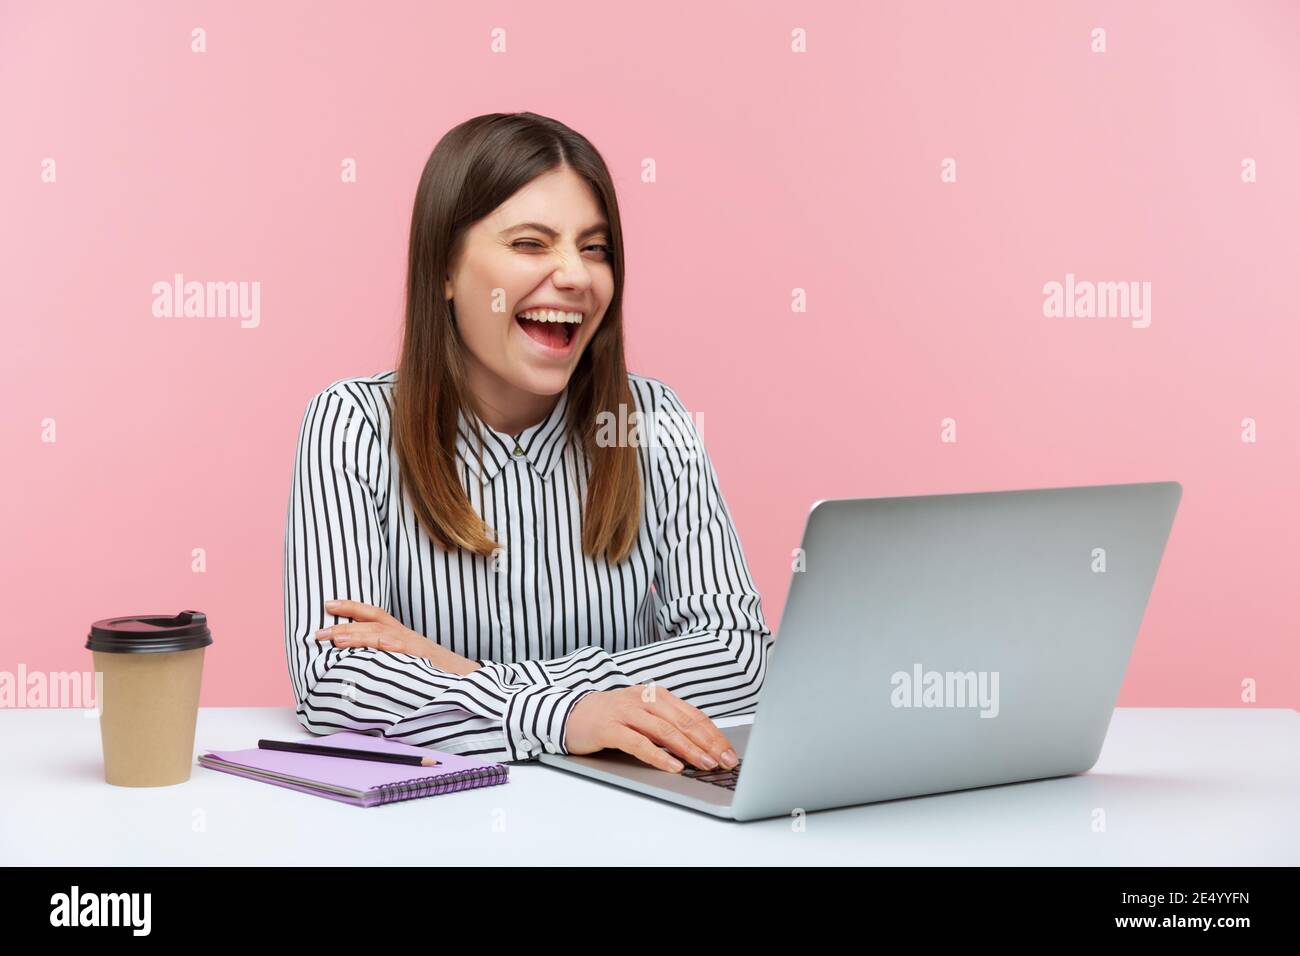 Mischievous excited woman office worker in striped shirt sitting at workplace and winking, looking at camera with toothy smile, good mood, happiness. Stock Photo